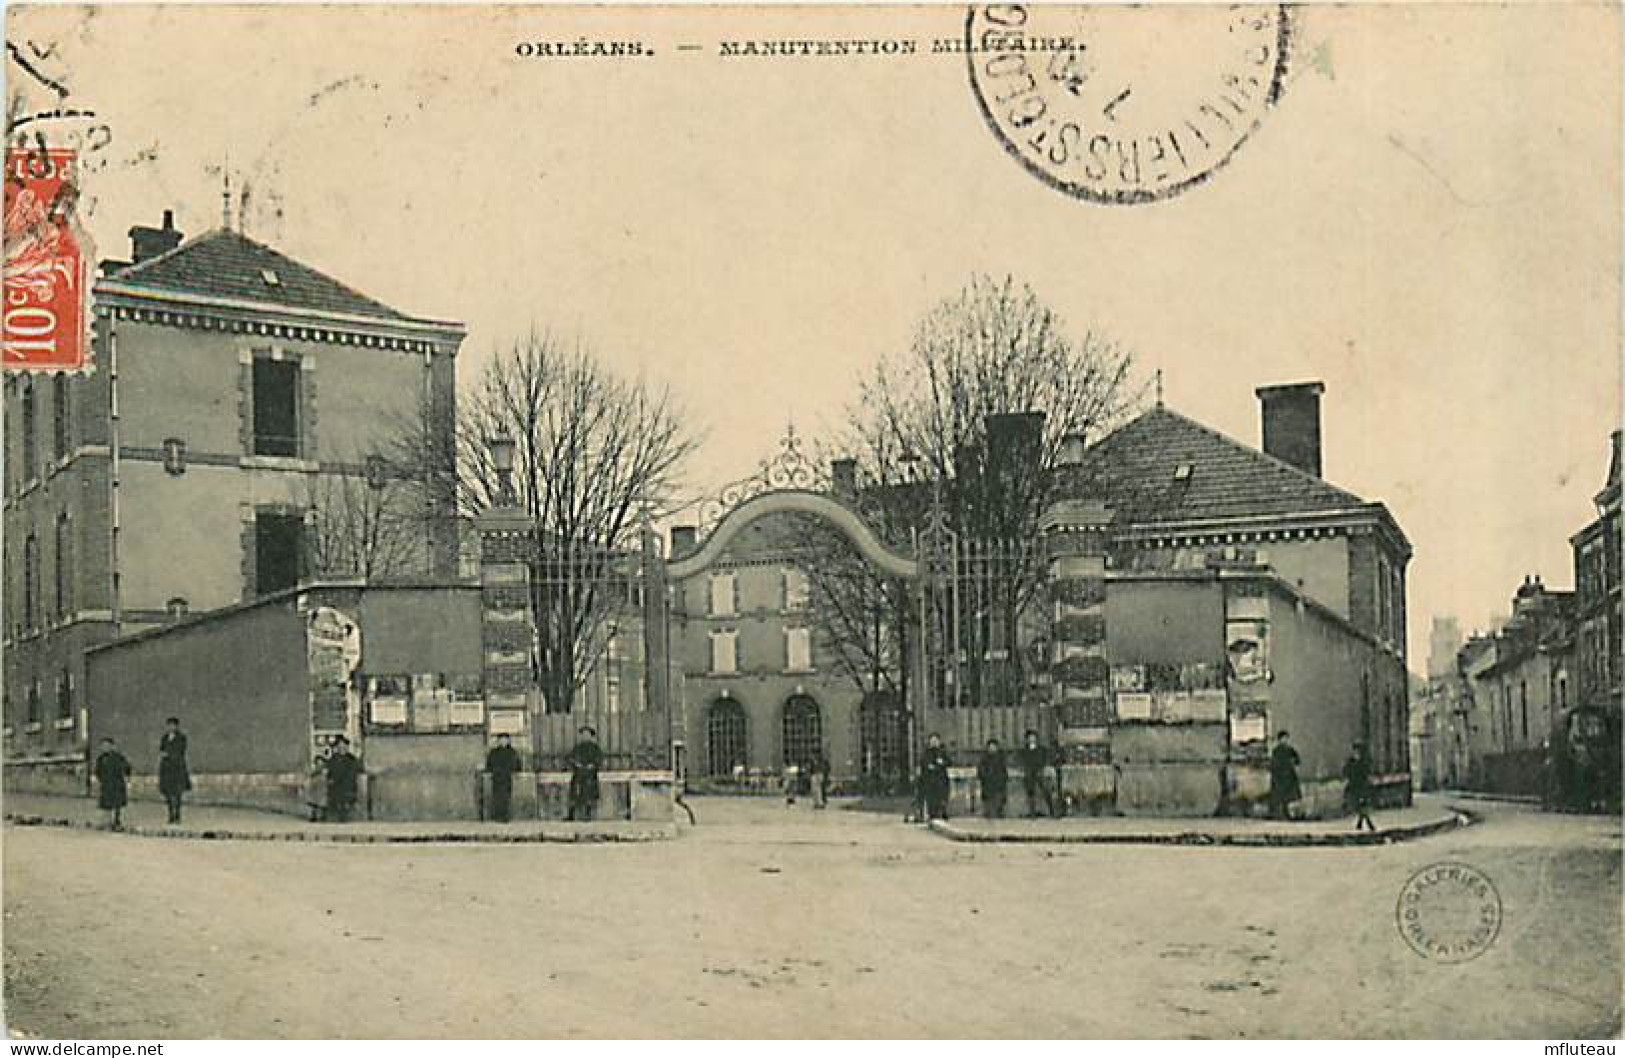 45* ORLEANS  Manutention Militaire      MA93,0572 - Orleans